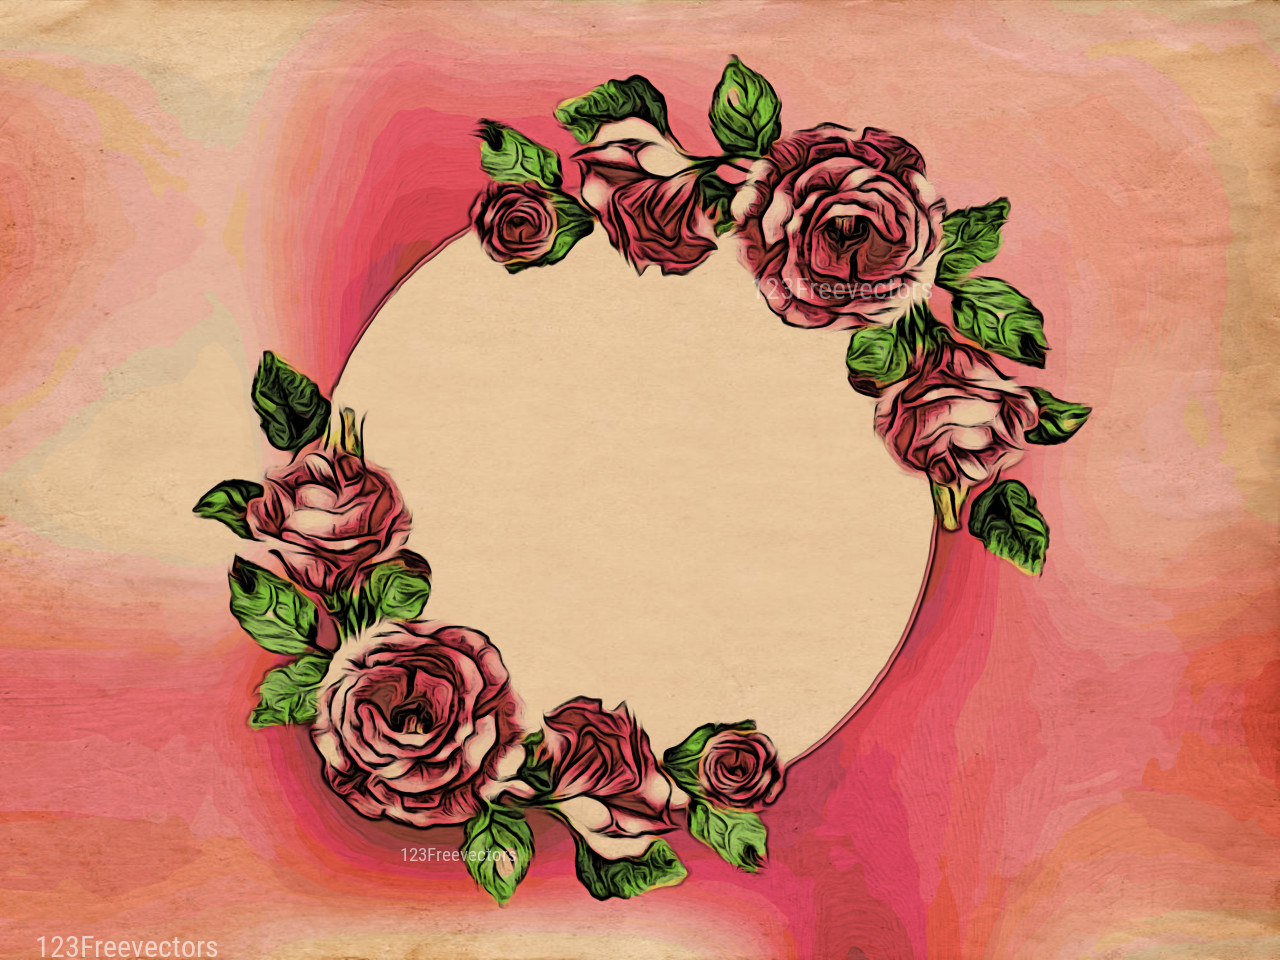 Floral Greeting Card Background Image